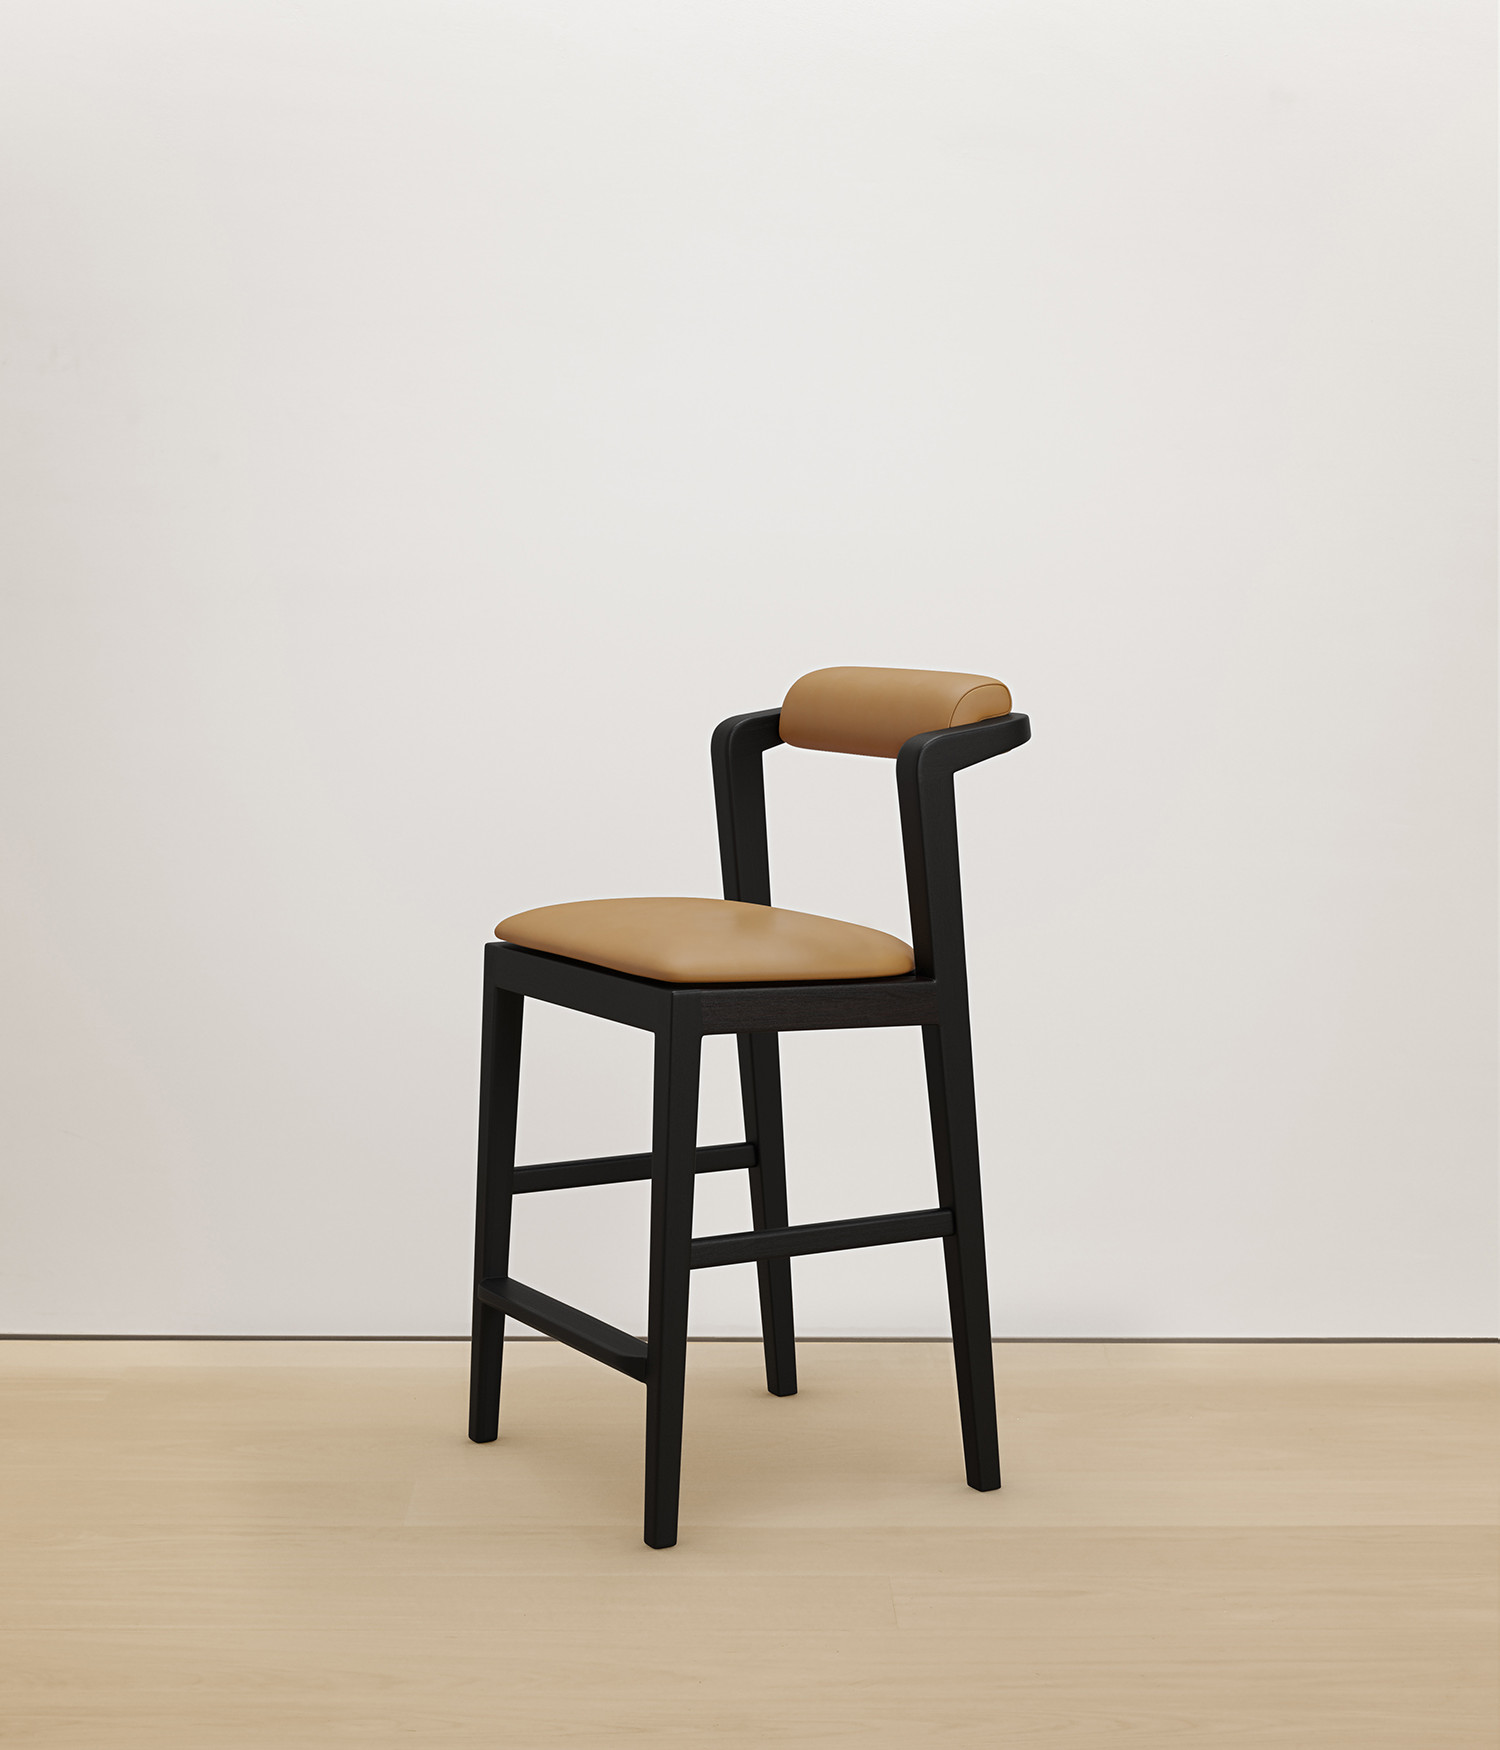  black-stained-oak stool with tan color upholstered seat